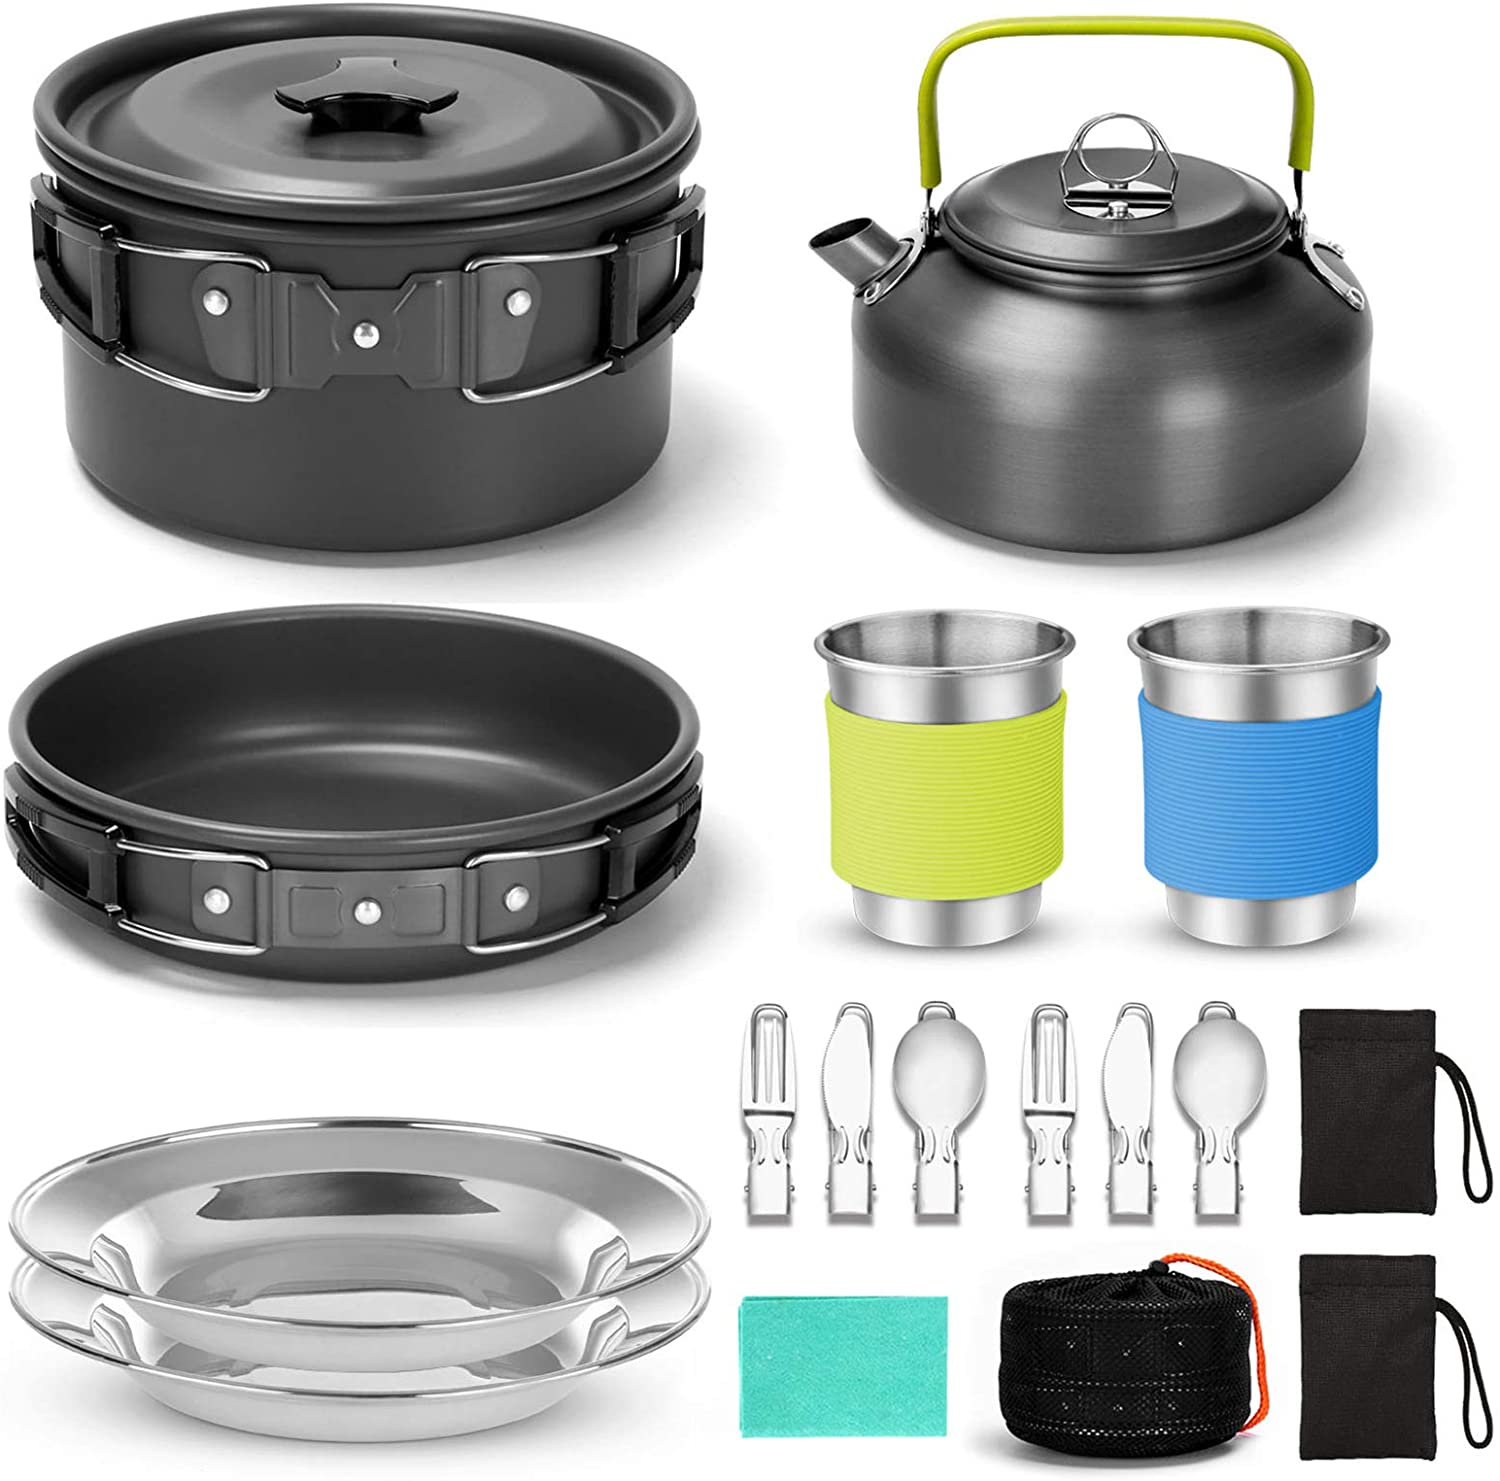 7. Odoland Camping Cookware Mess Kit